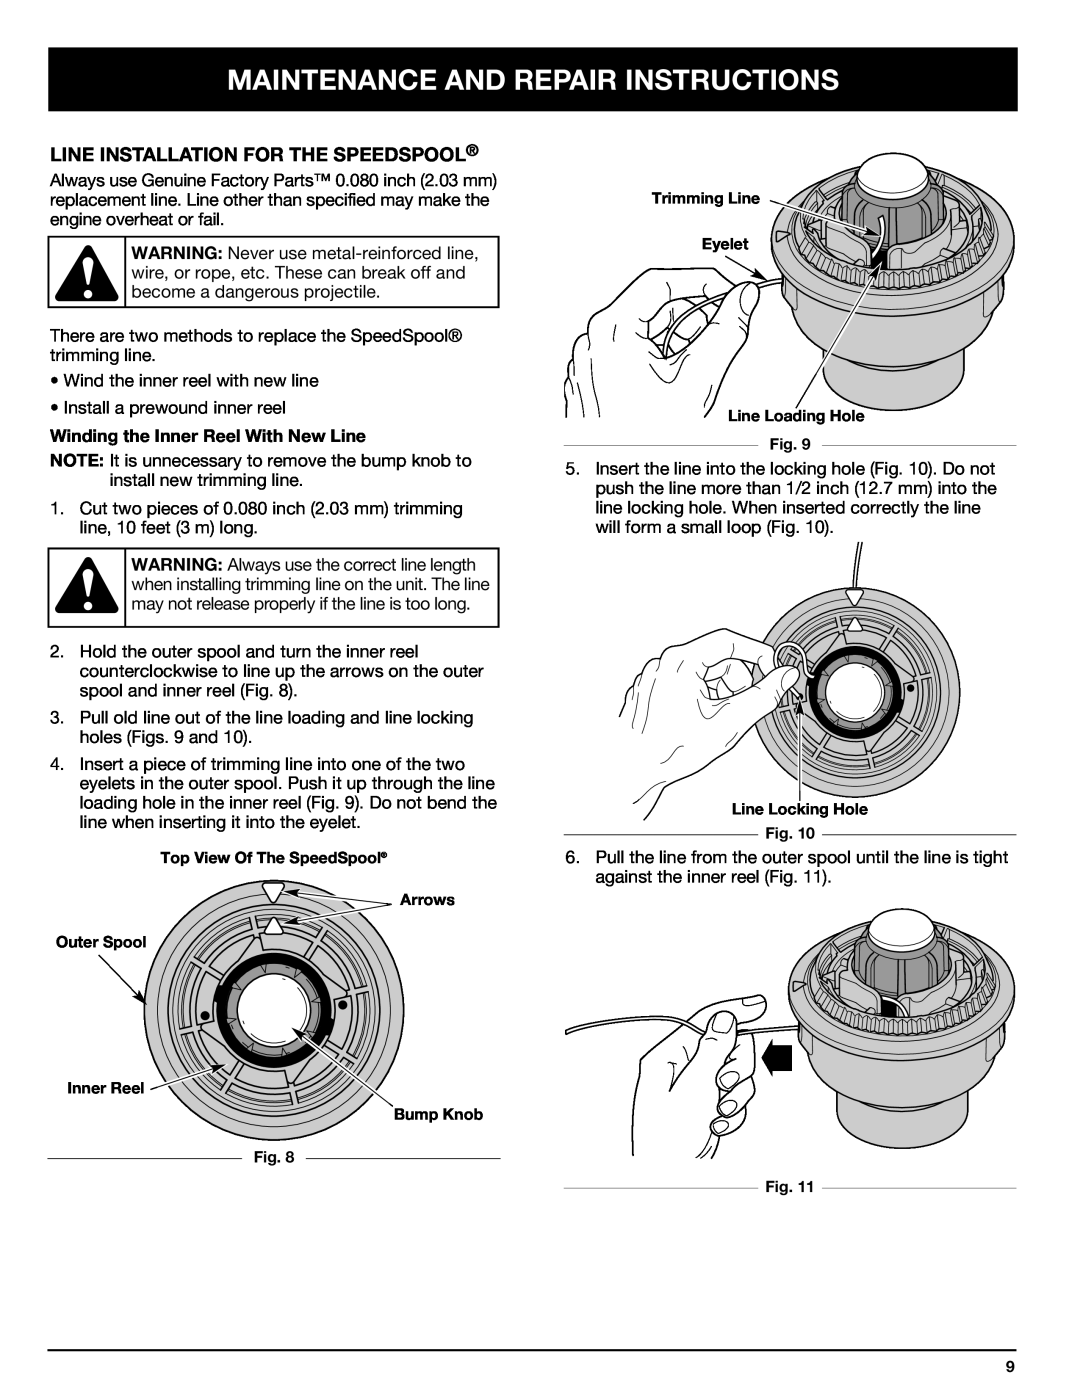 Troy-Bilt 769-00425A manual Maintenance And Repair Instructions, Line Installation For The Speedspool 